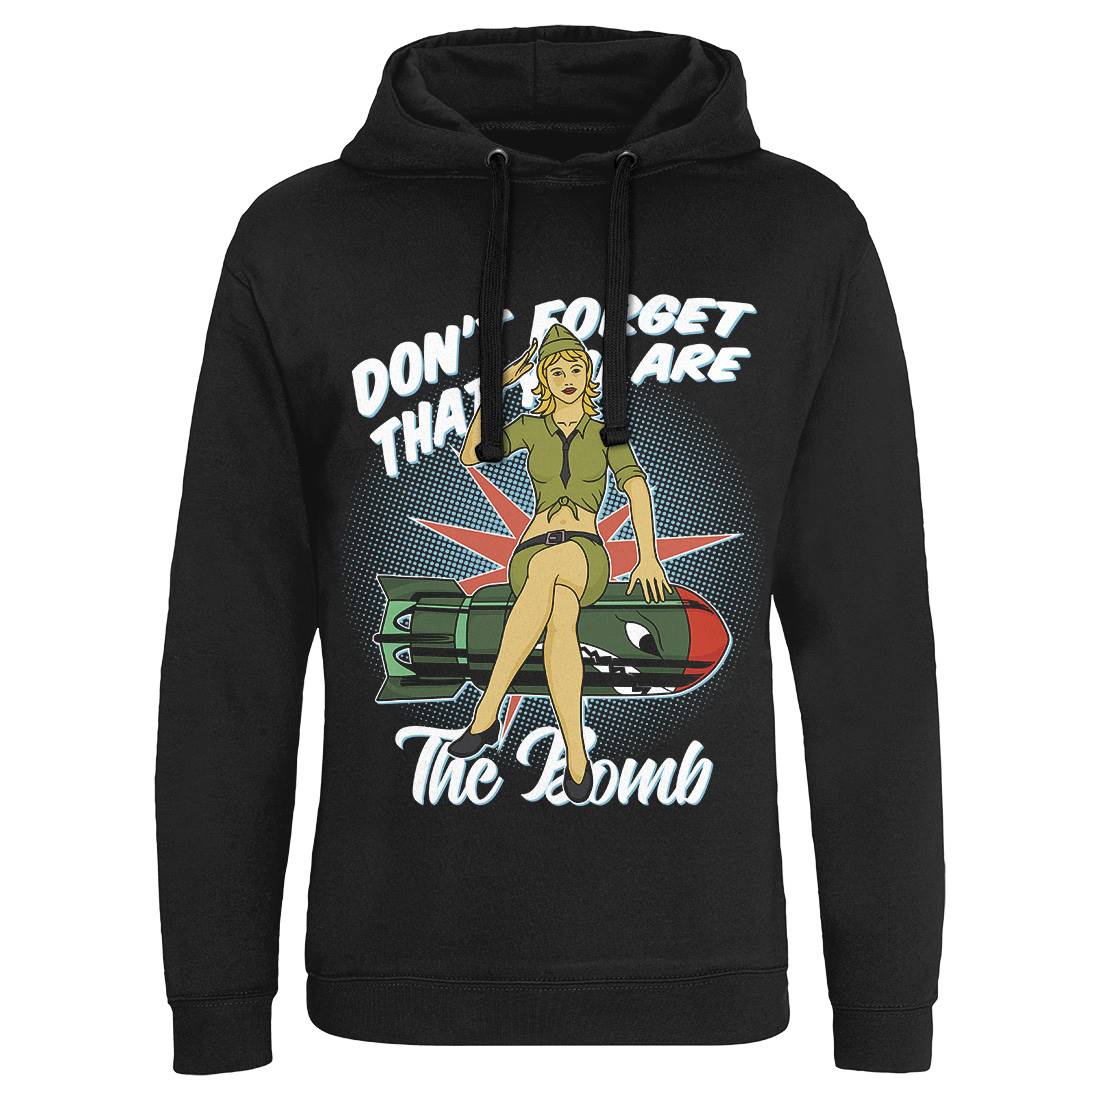 Girl Mens Hoodie Without Pocket Army C841